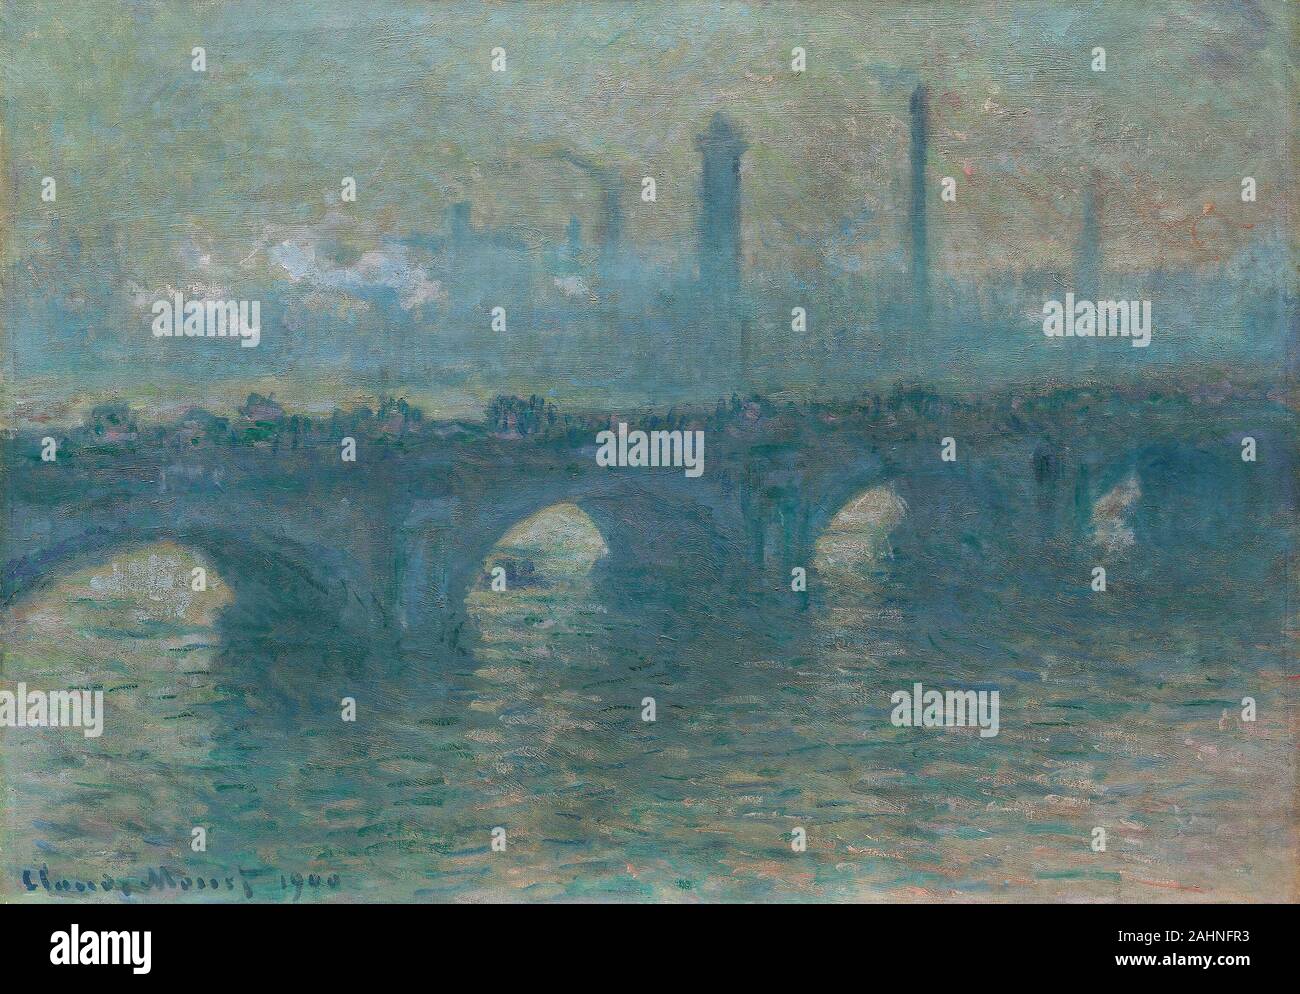 Claude Monet. Waterloo Bridge, Gray Weather. 1900. France. Oil on canvas If not for the fog, Claude Monet once remarked, “London wouldn’t be a beautiful city. It’s the fog that gives it its magnificent breadth.” While working on his London series, he rose early every day to paint Waterloo Bridge in the morning, moving on to Charing Cross Bridge at midday and in the afternoon. He observed both motifs from his fifth-floor window at the Savoy Hotel. The Art Institute’s two Waterloo Bridge paintings are dated 1900 and 1903, but both were likely begun in 1900 and dated only when Monet felt that the Stock Photo